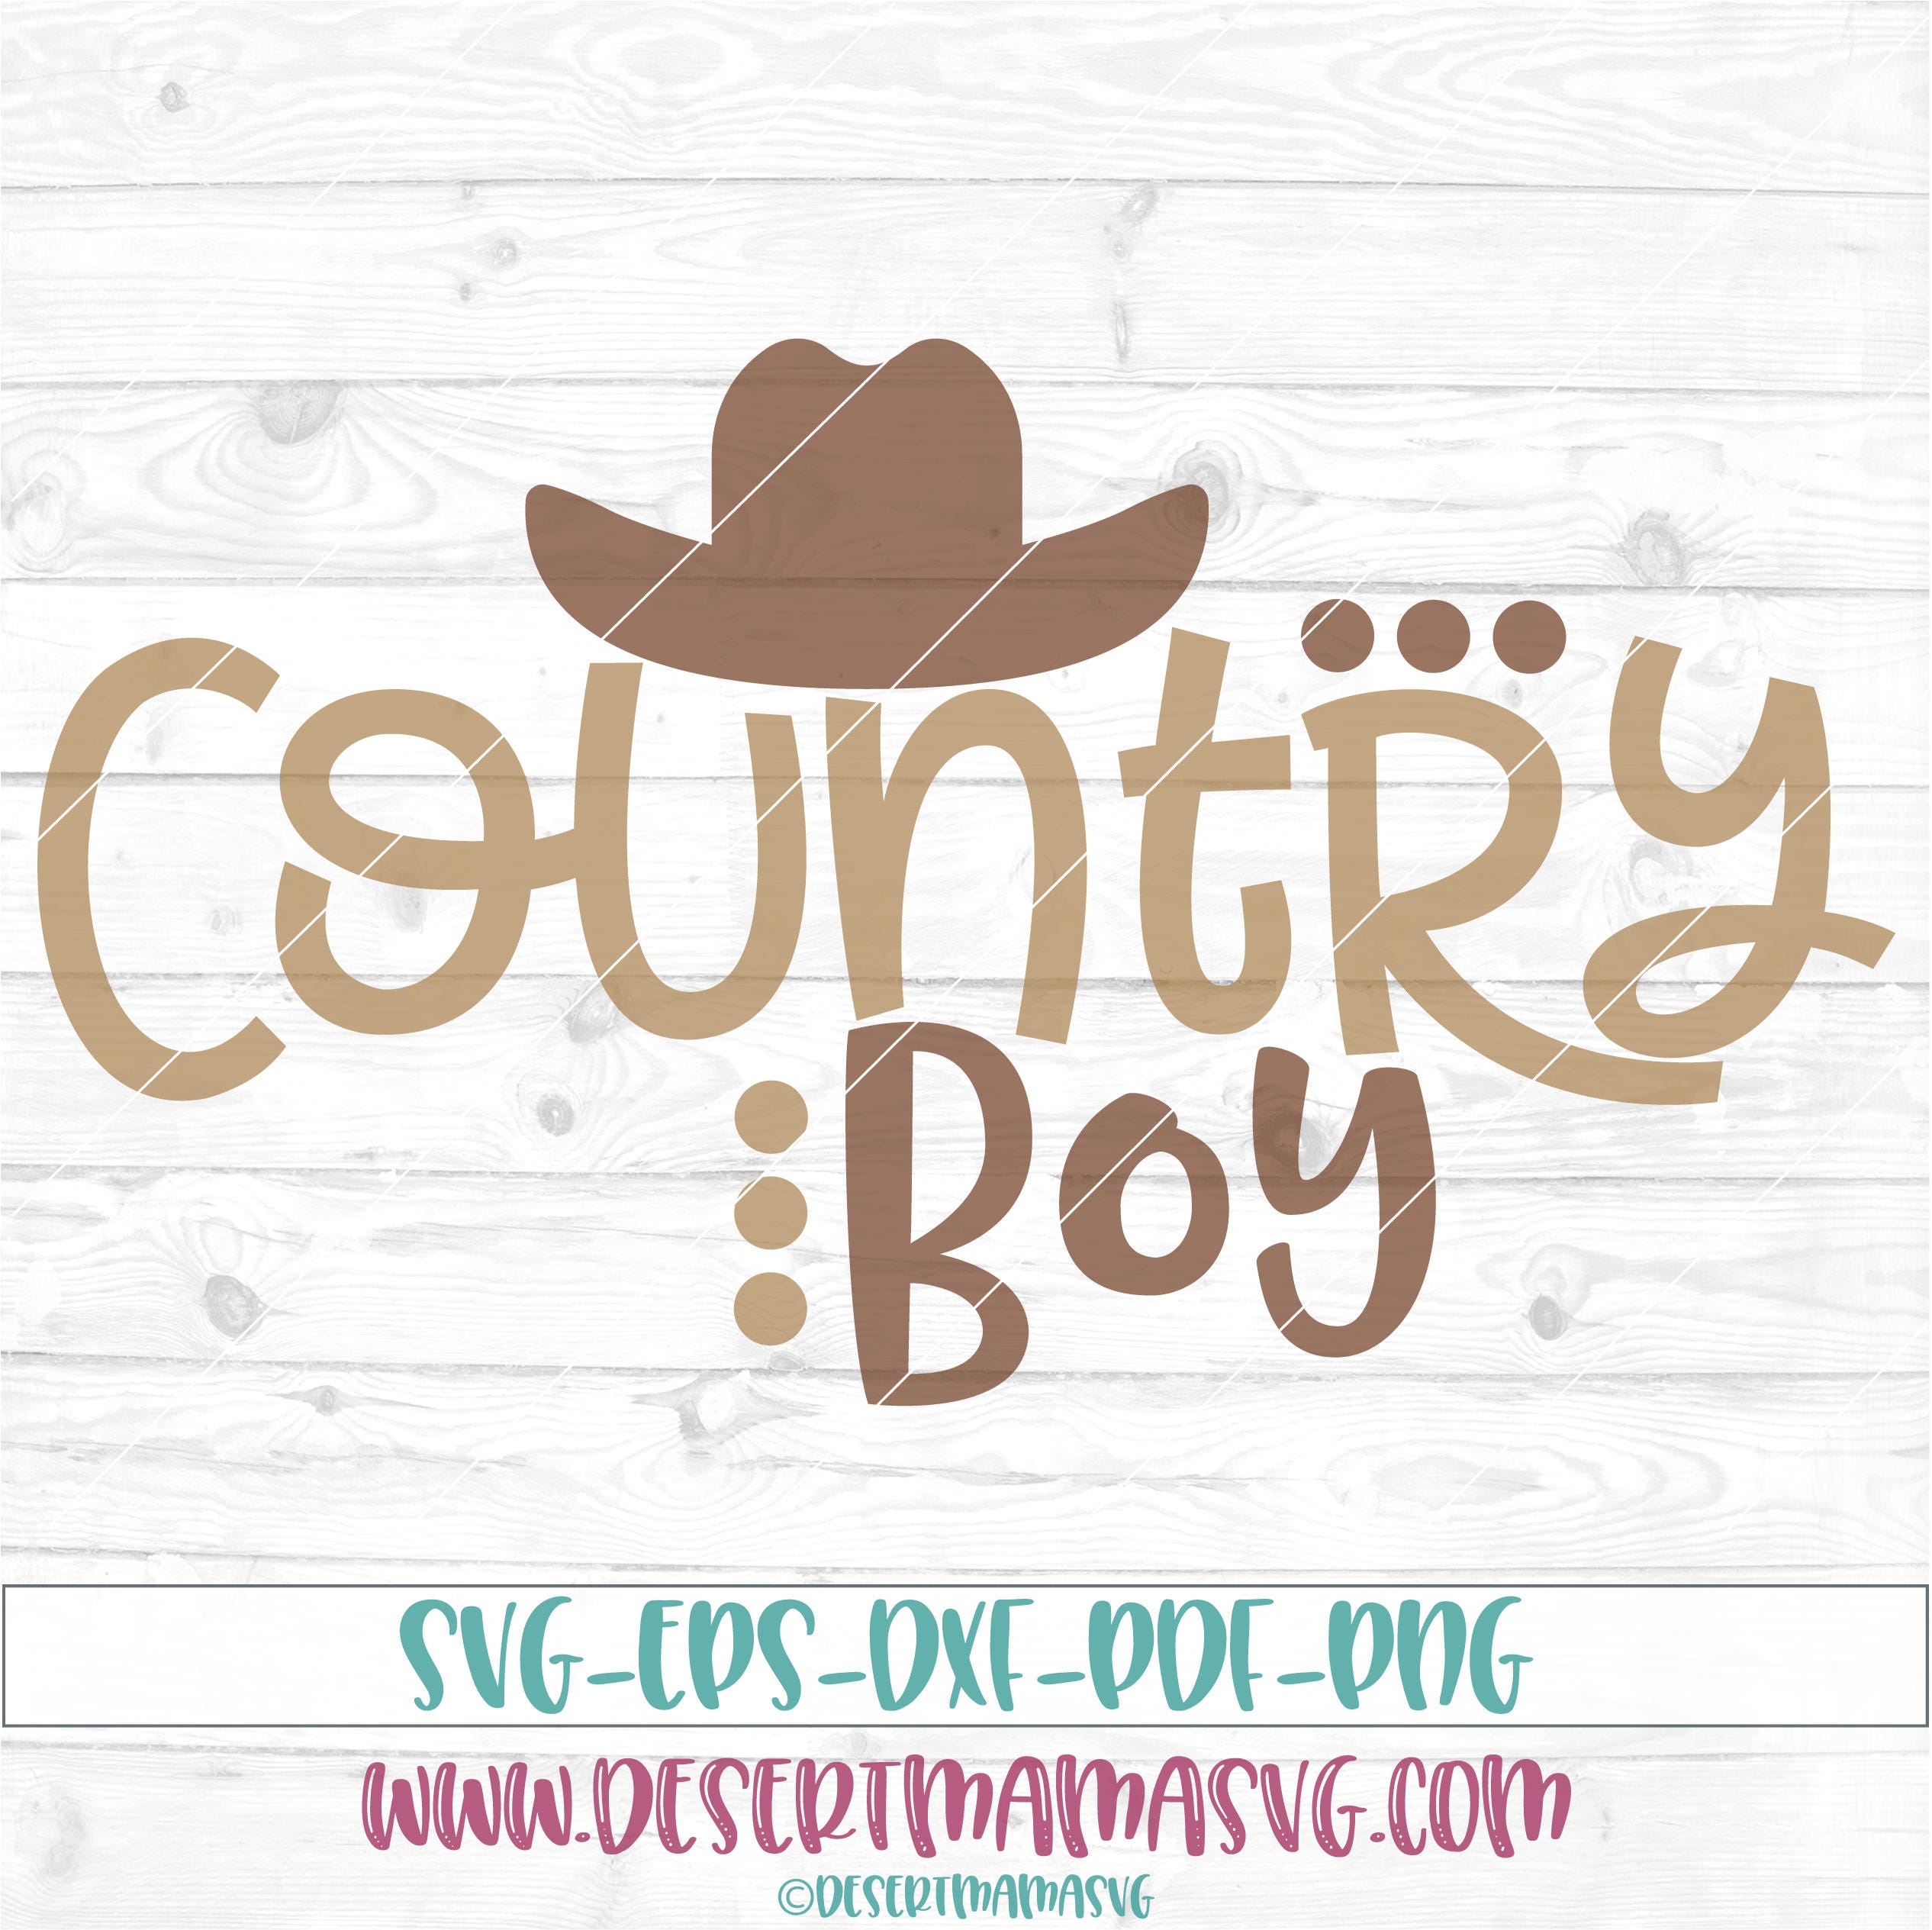 Download Country boy svg eps dxf png cricut cameo scan N cut cut